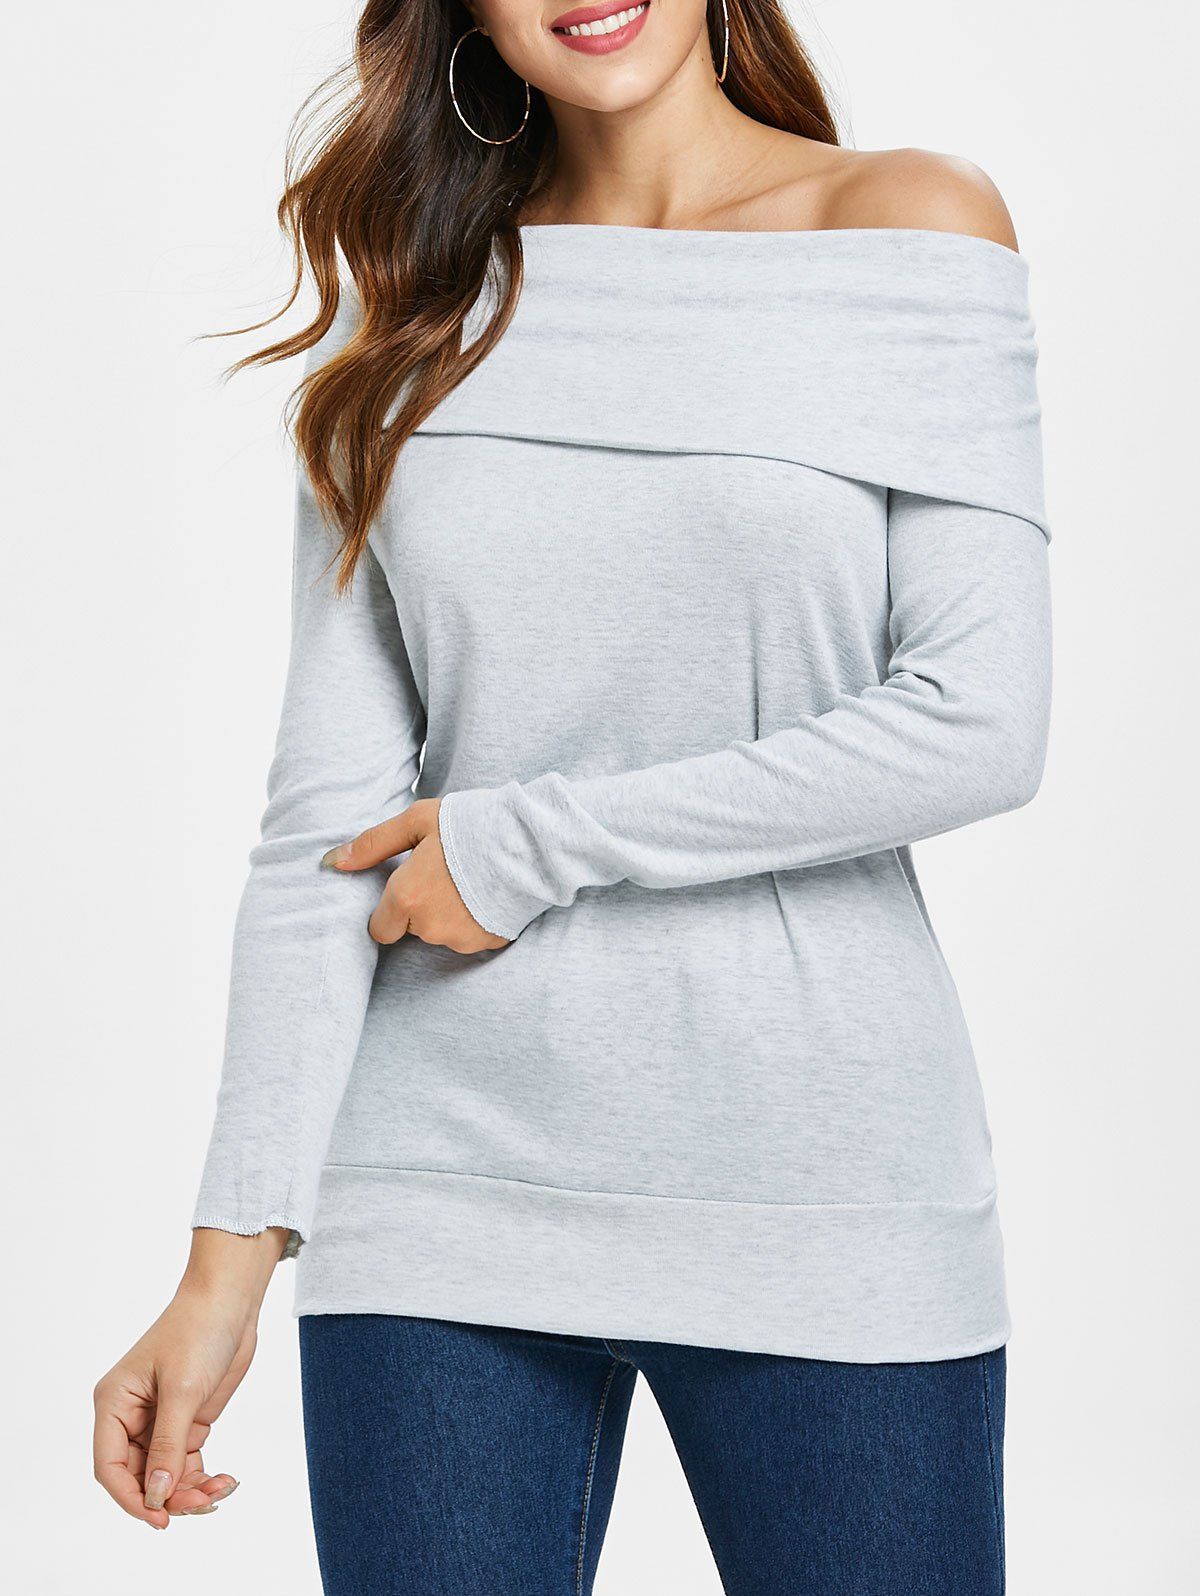 Multiway Off The Shoulder T-Shirt - GRAY XL